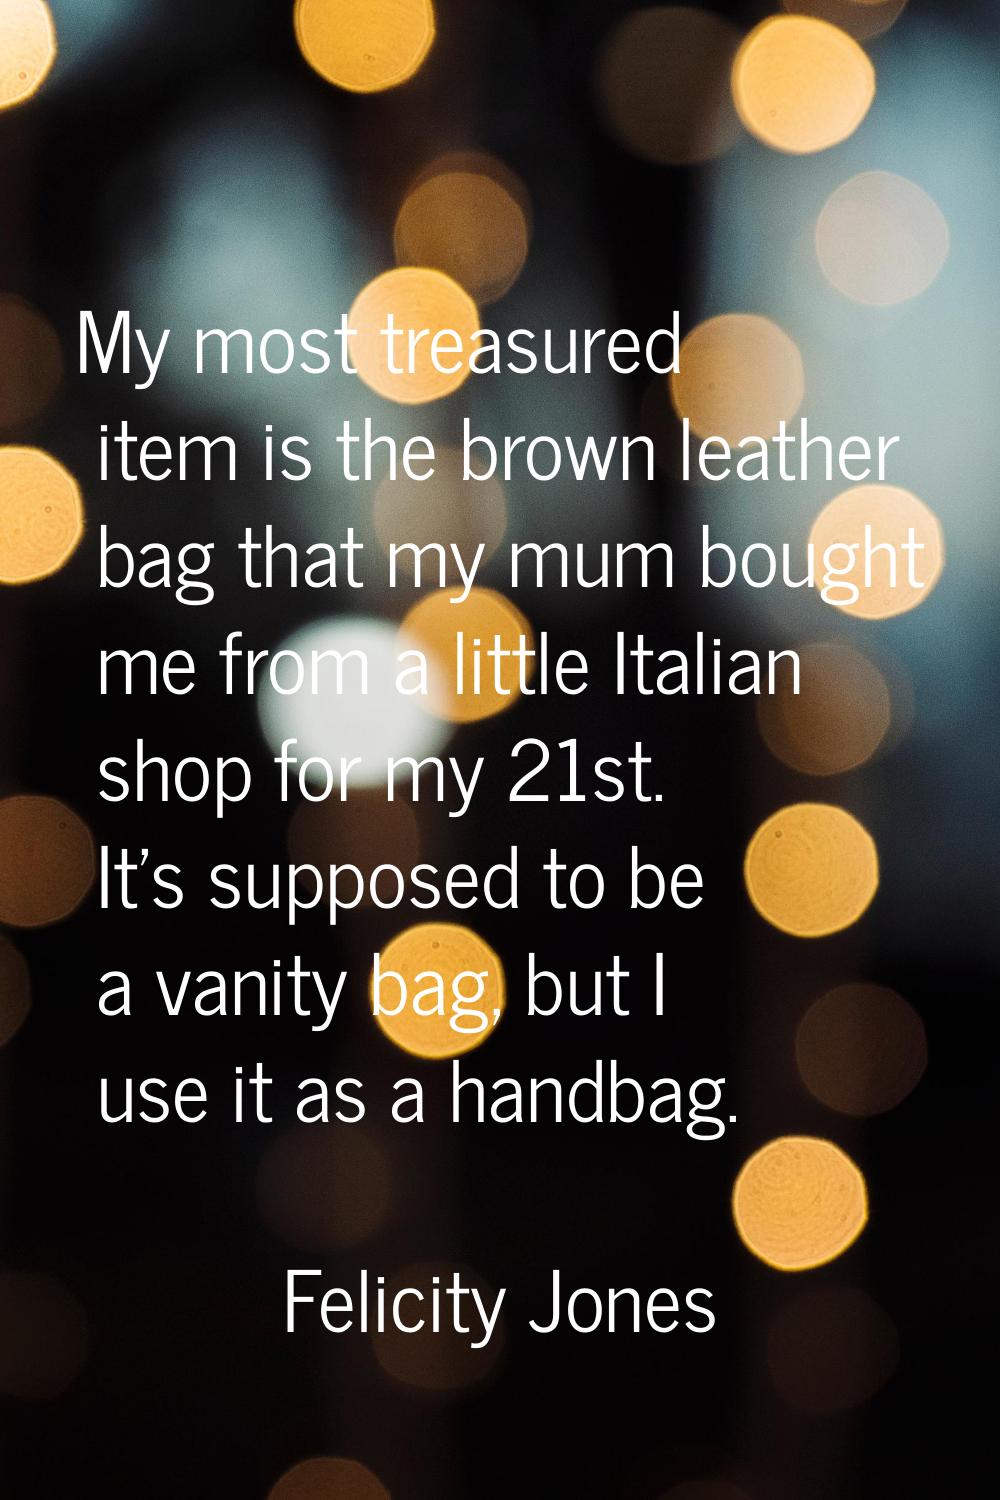 My most treasured item is the brown leather bag that my mum bought me from a little Italian shop fo